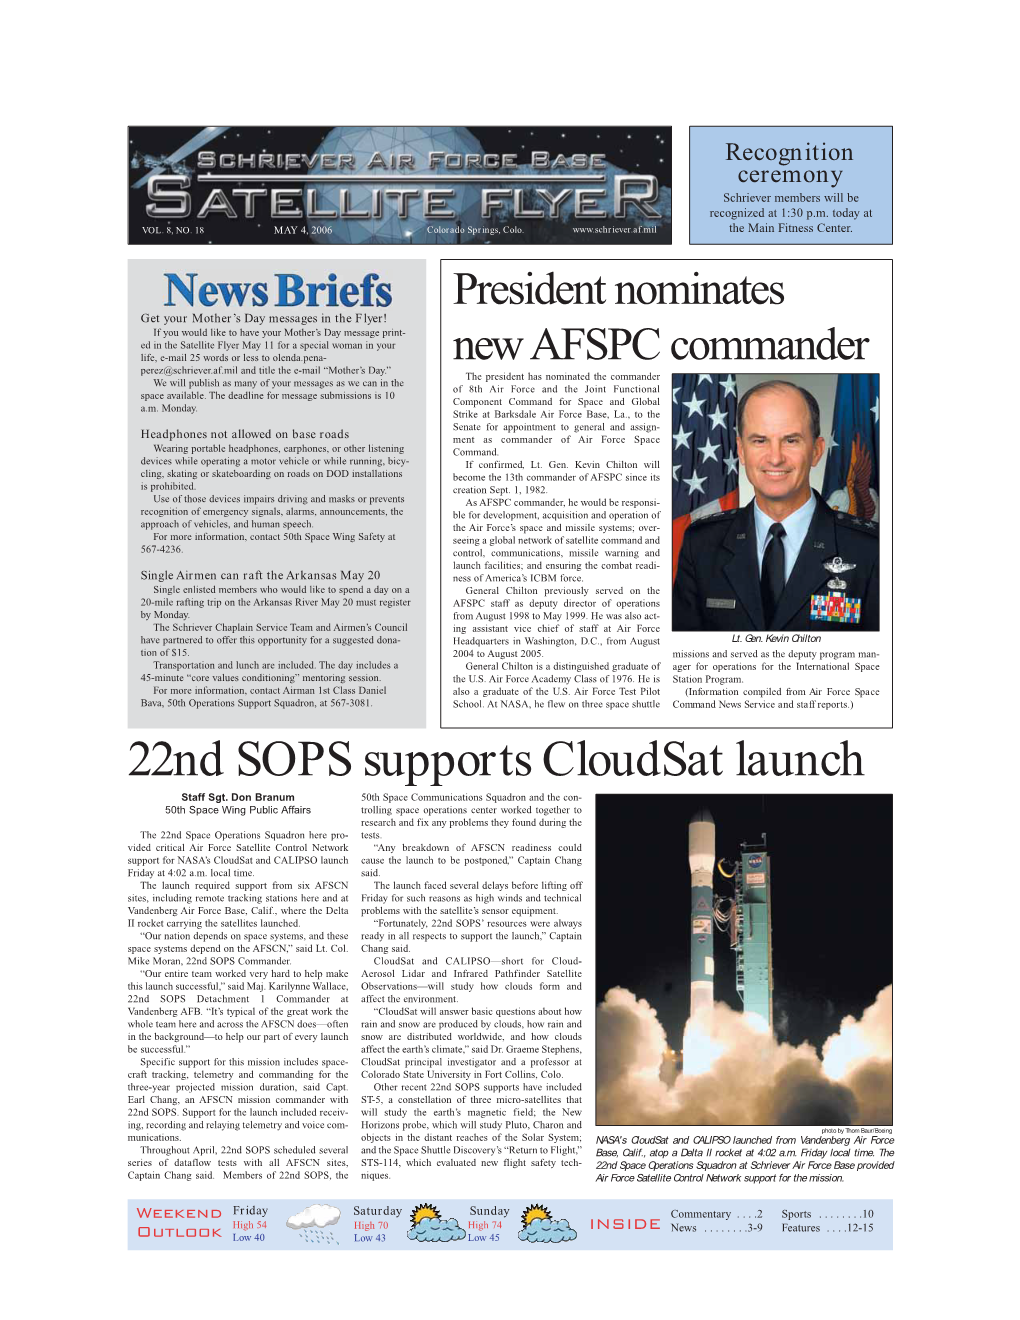 22Nd SOPS Supports Cloudsat Launch Staff Sgt